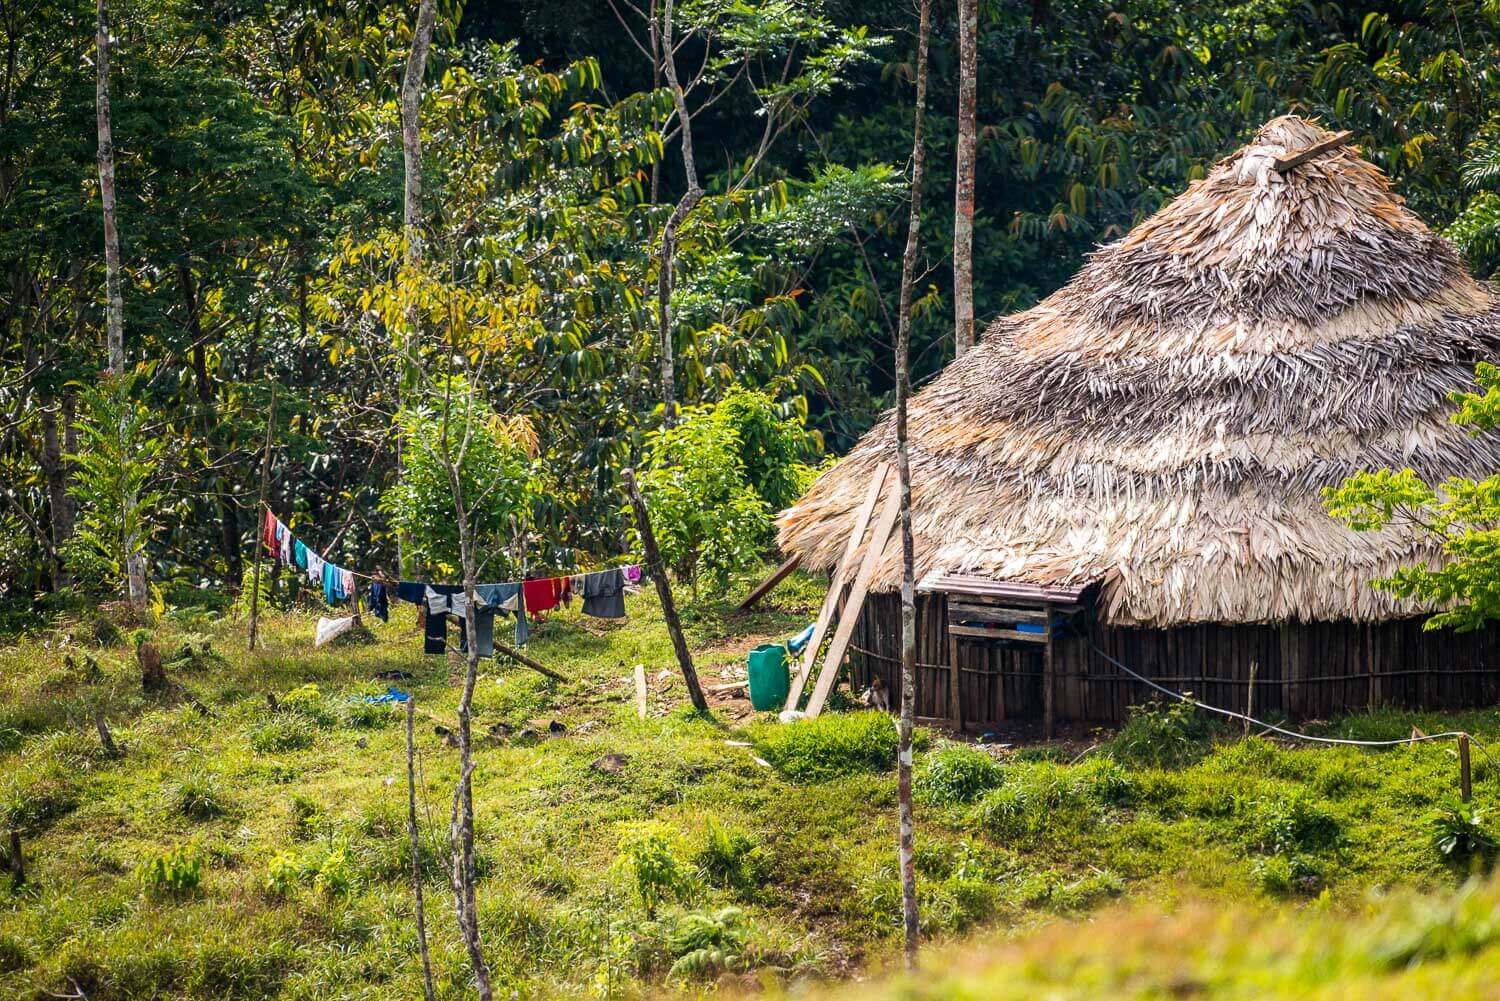 The Cabecar Indians houses are beautifully built with wood and palm leaf roofs in the middle of lush nature